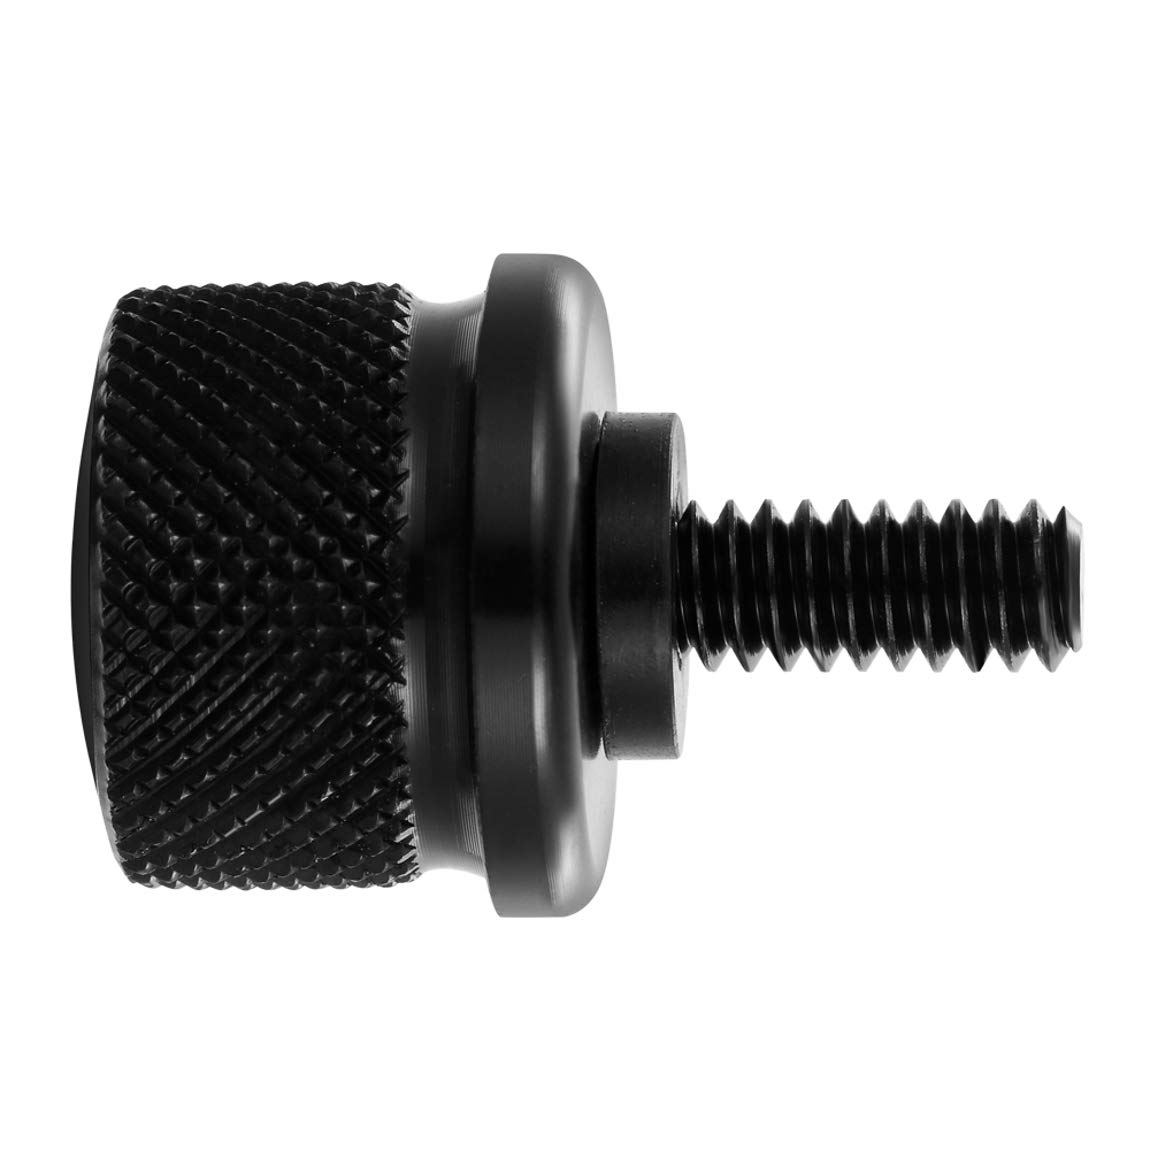 PBYMT Black Rear Fender Seat Bolt Tab Screw Compatible for Harley Davidson Softail Dyna Sportster Touring Street Glide Electra Road King 1997-2024 - PBYMT Black Rear Fender Seat Bolt Review